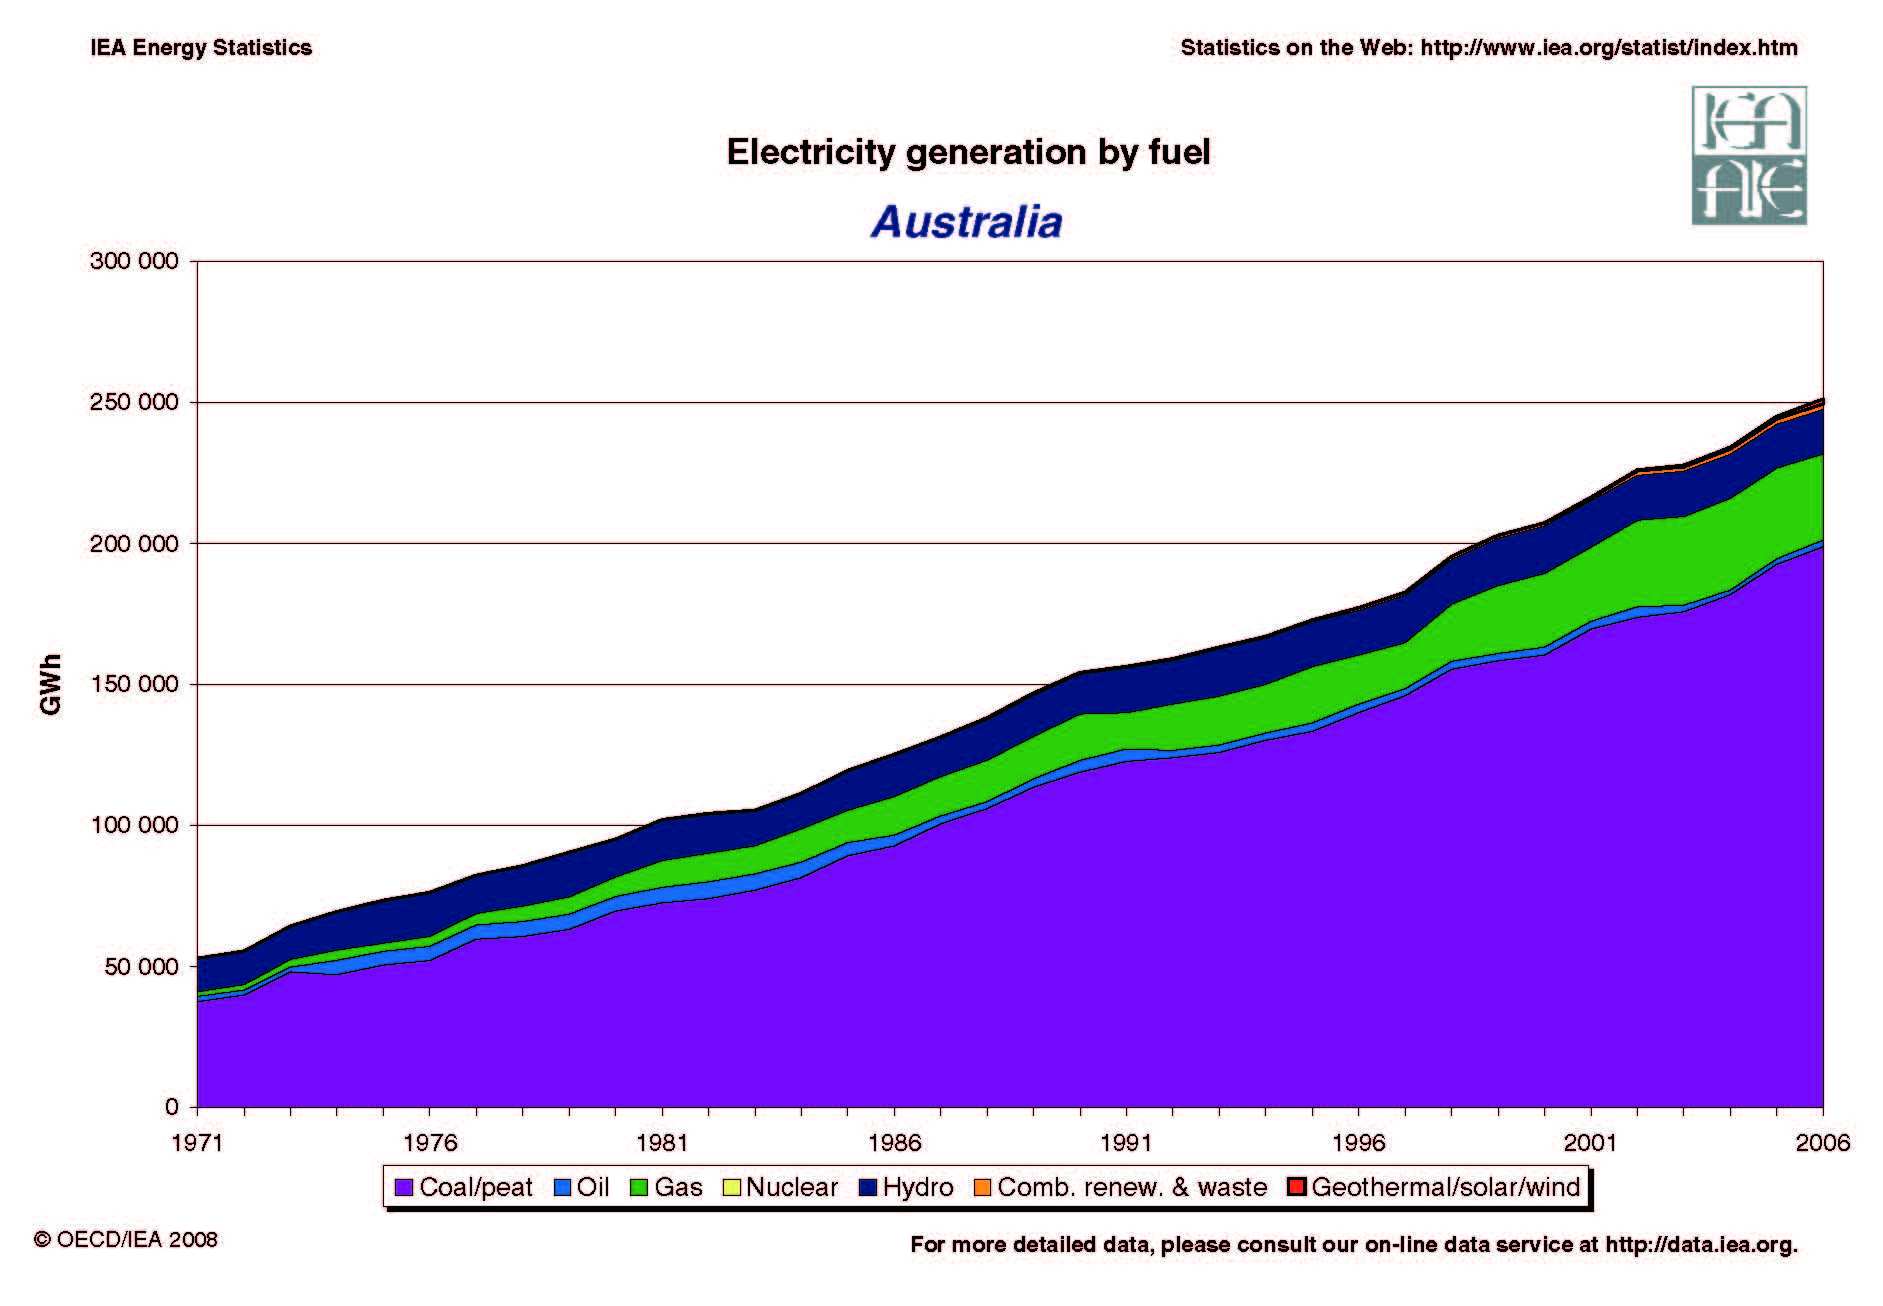 Electricity generation by fuel - Australia